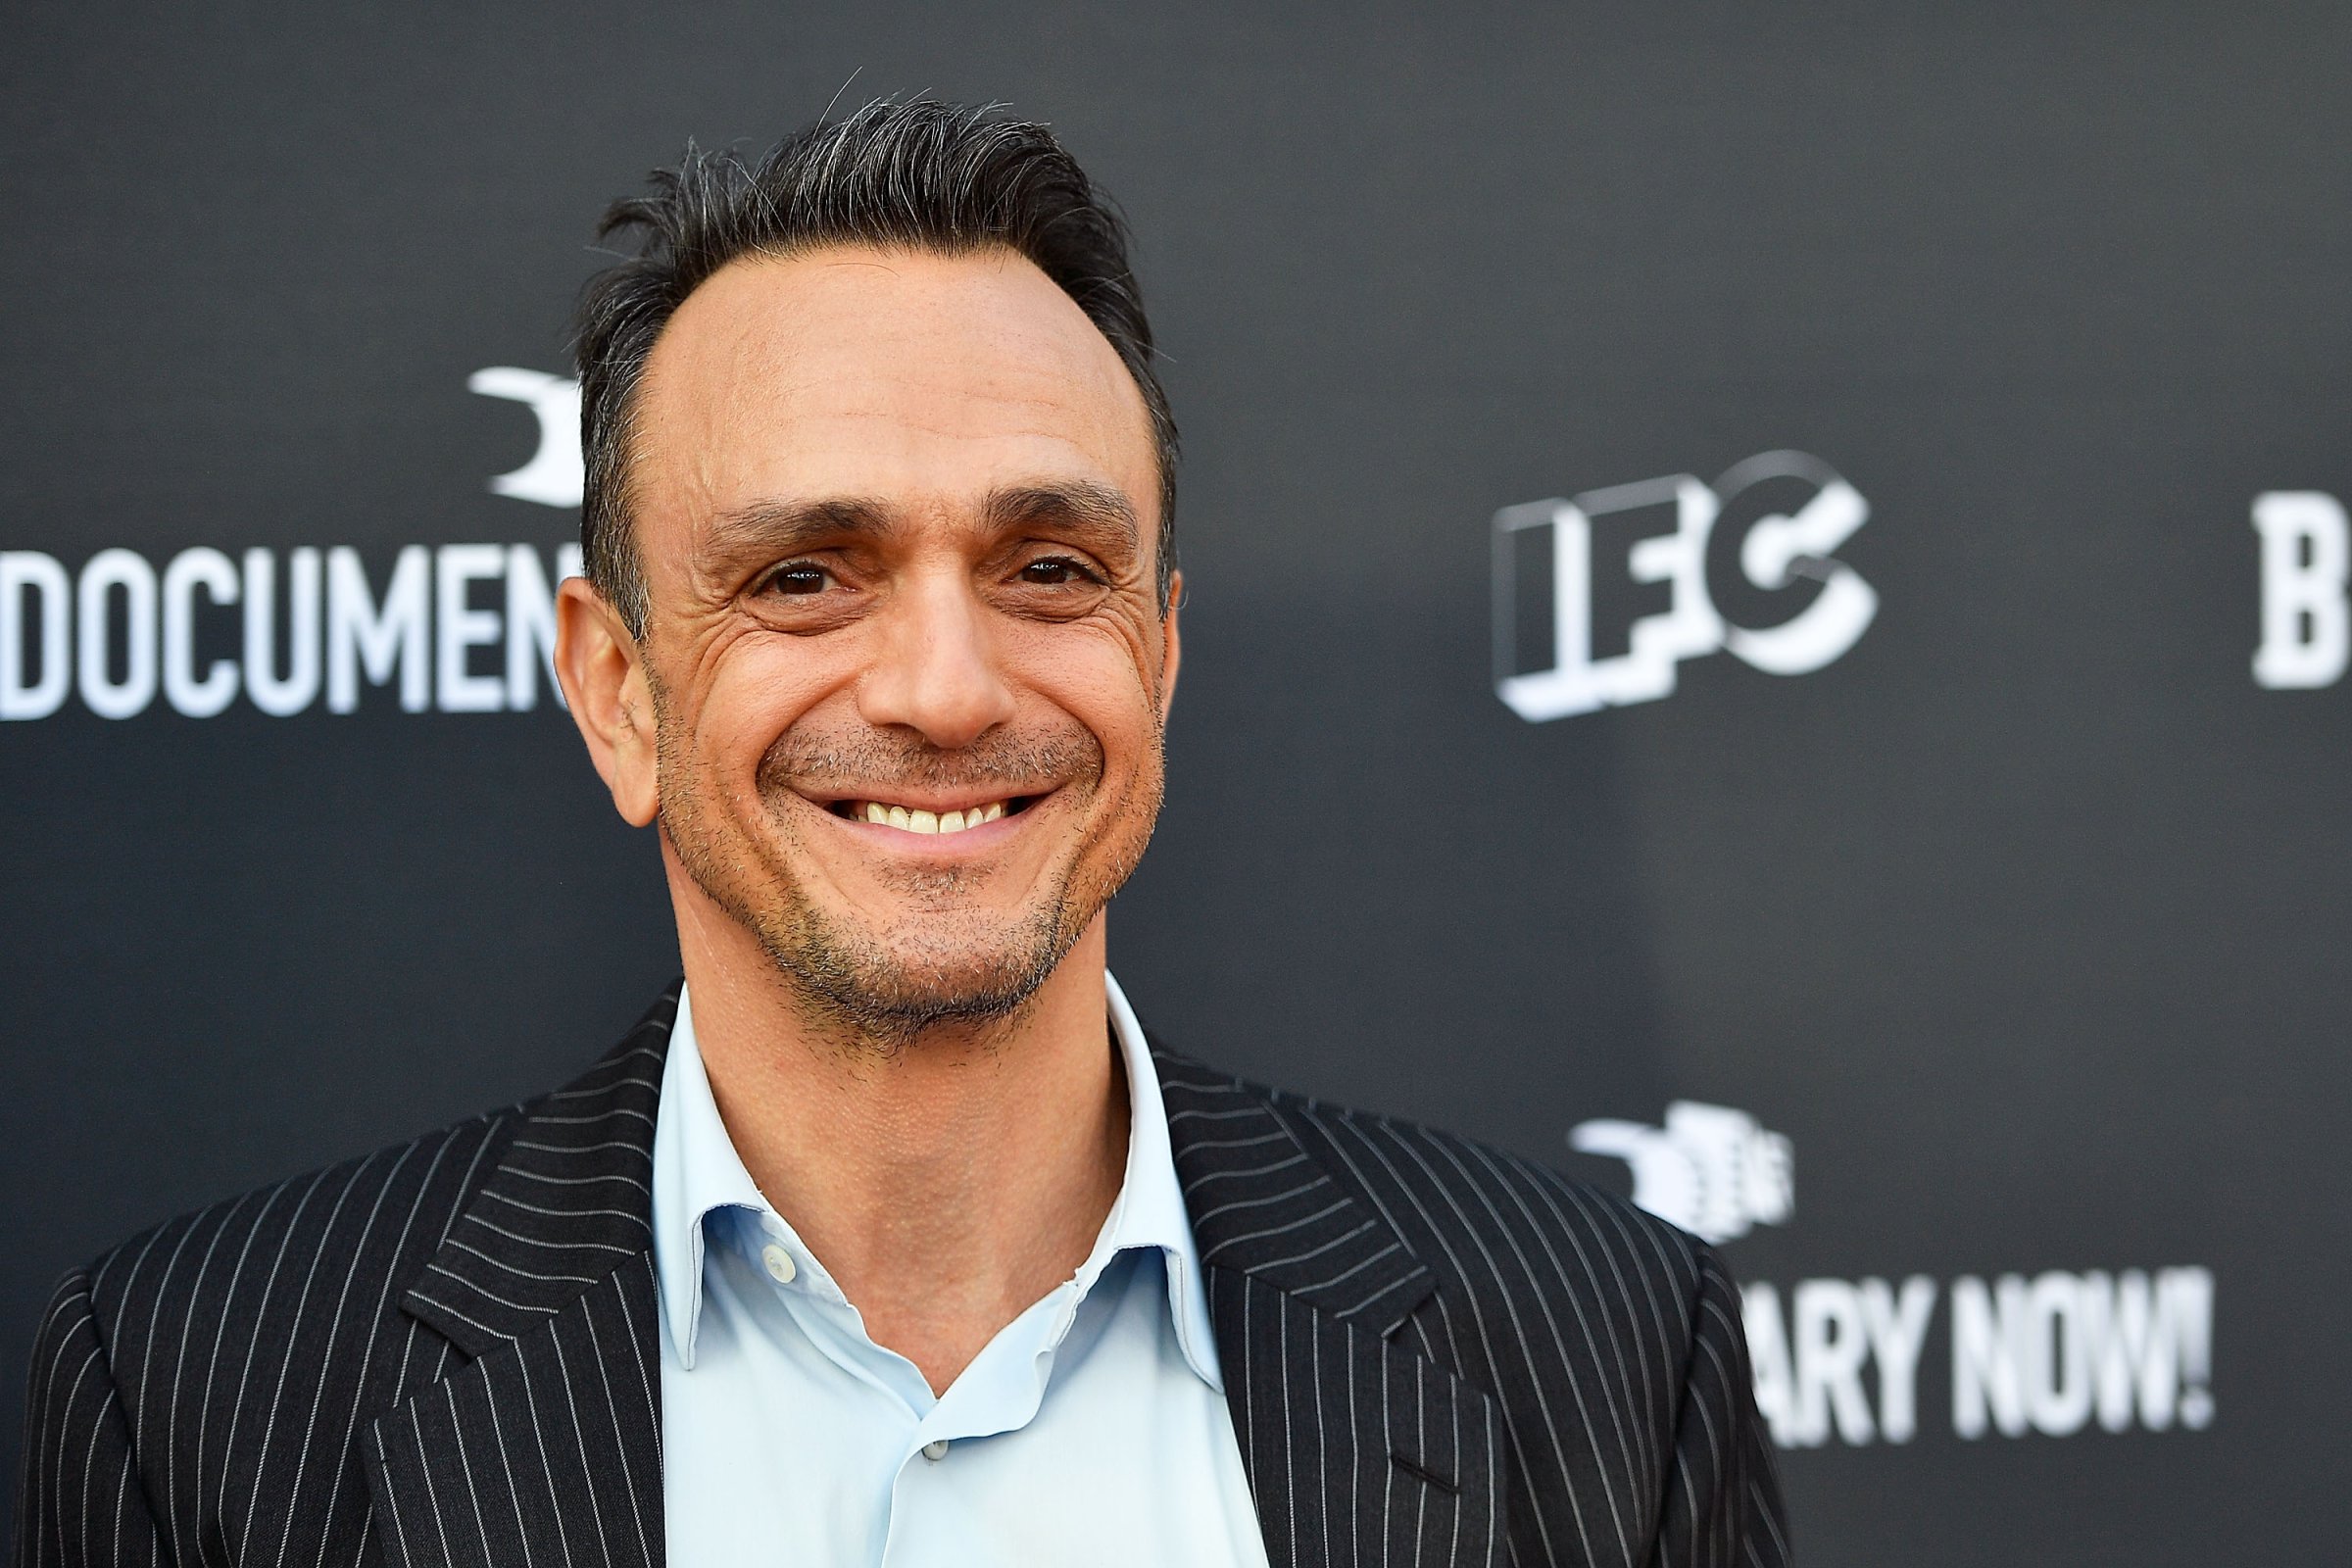 FYC Event For IFC's "Brockmire" And "Documentary Now!" - Arrivals